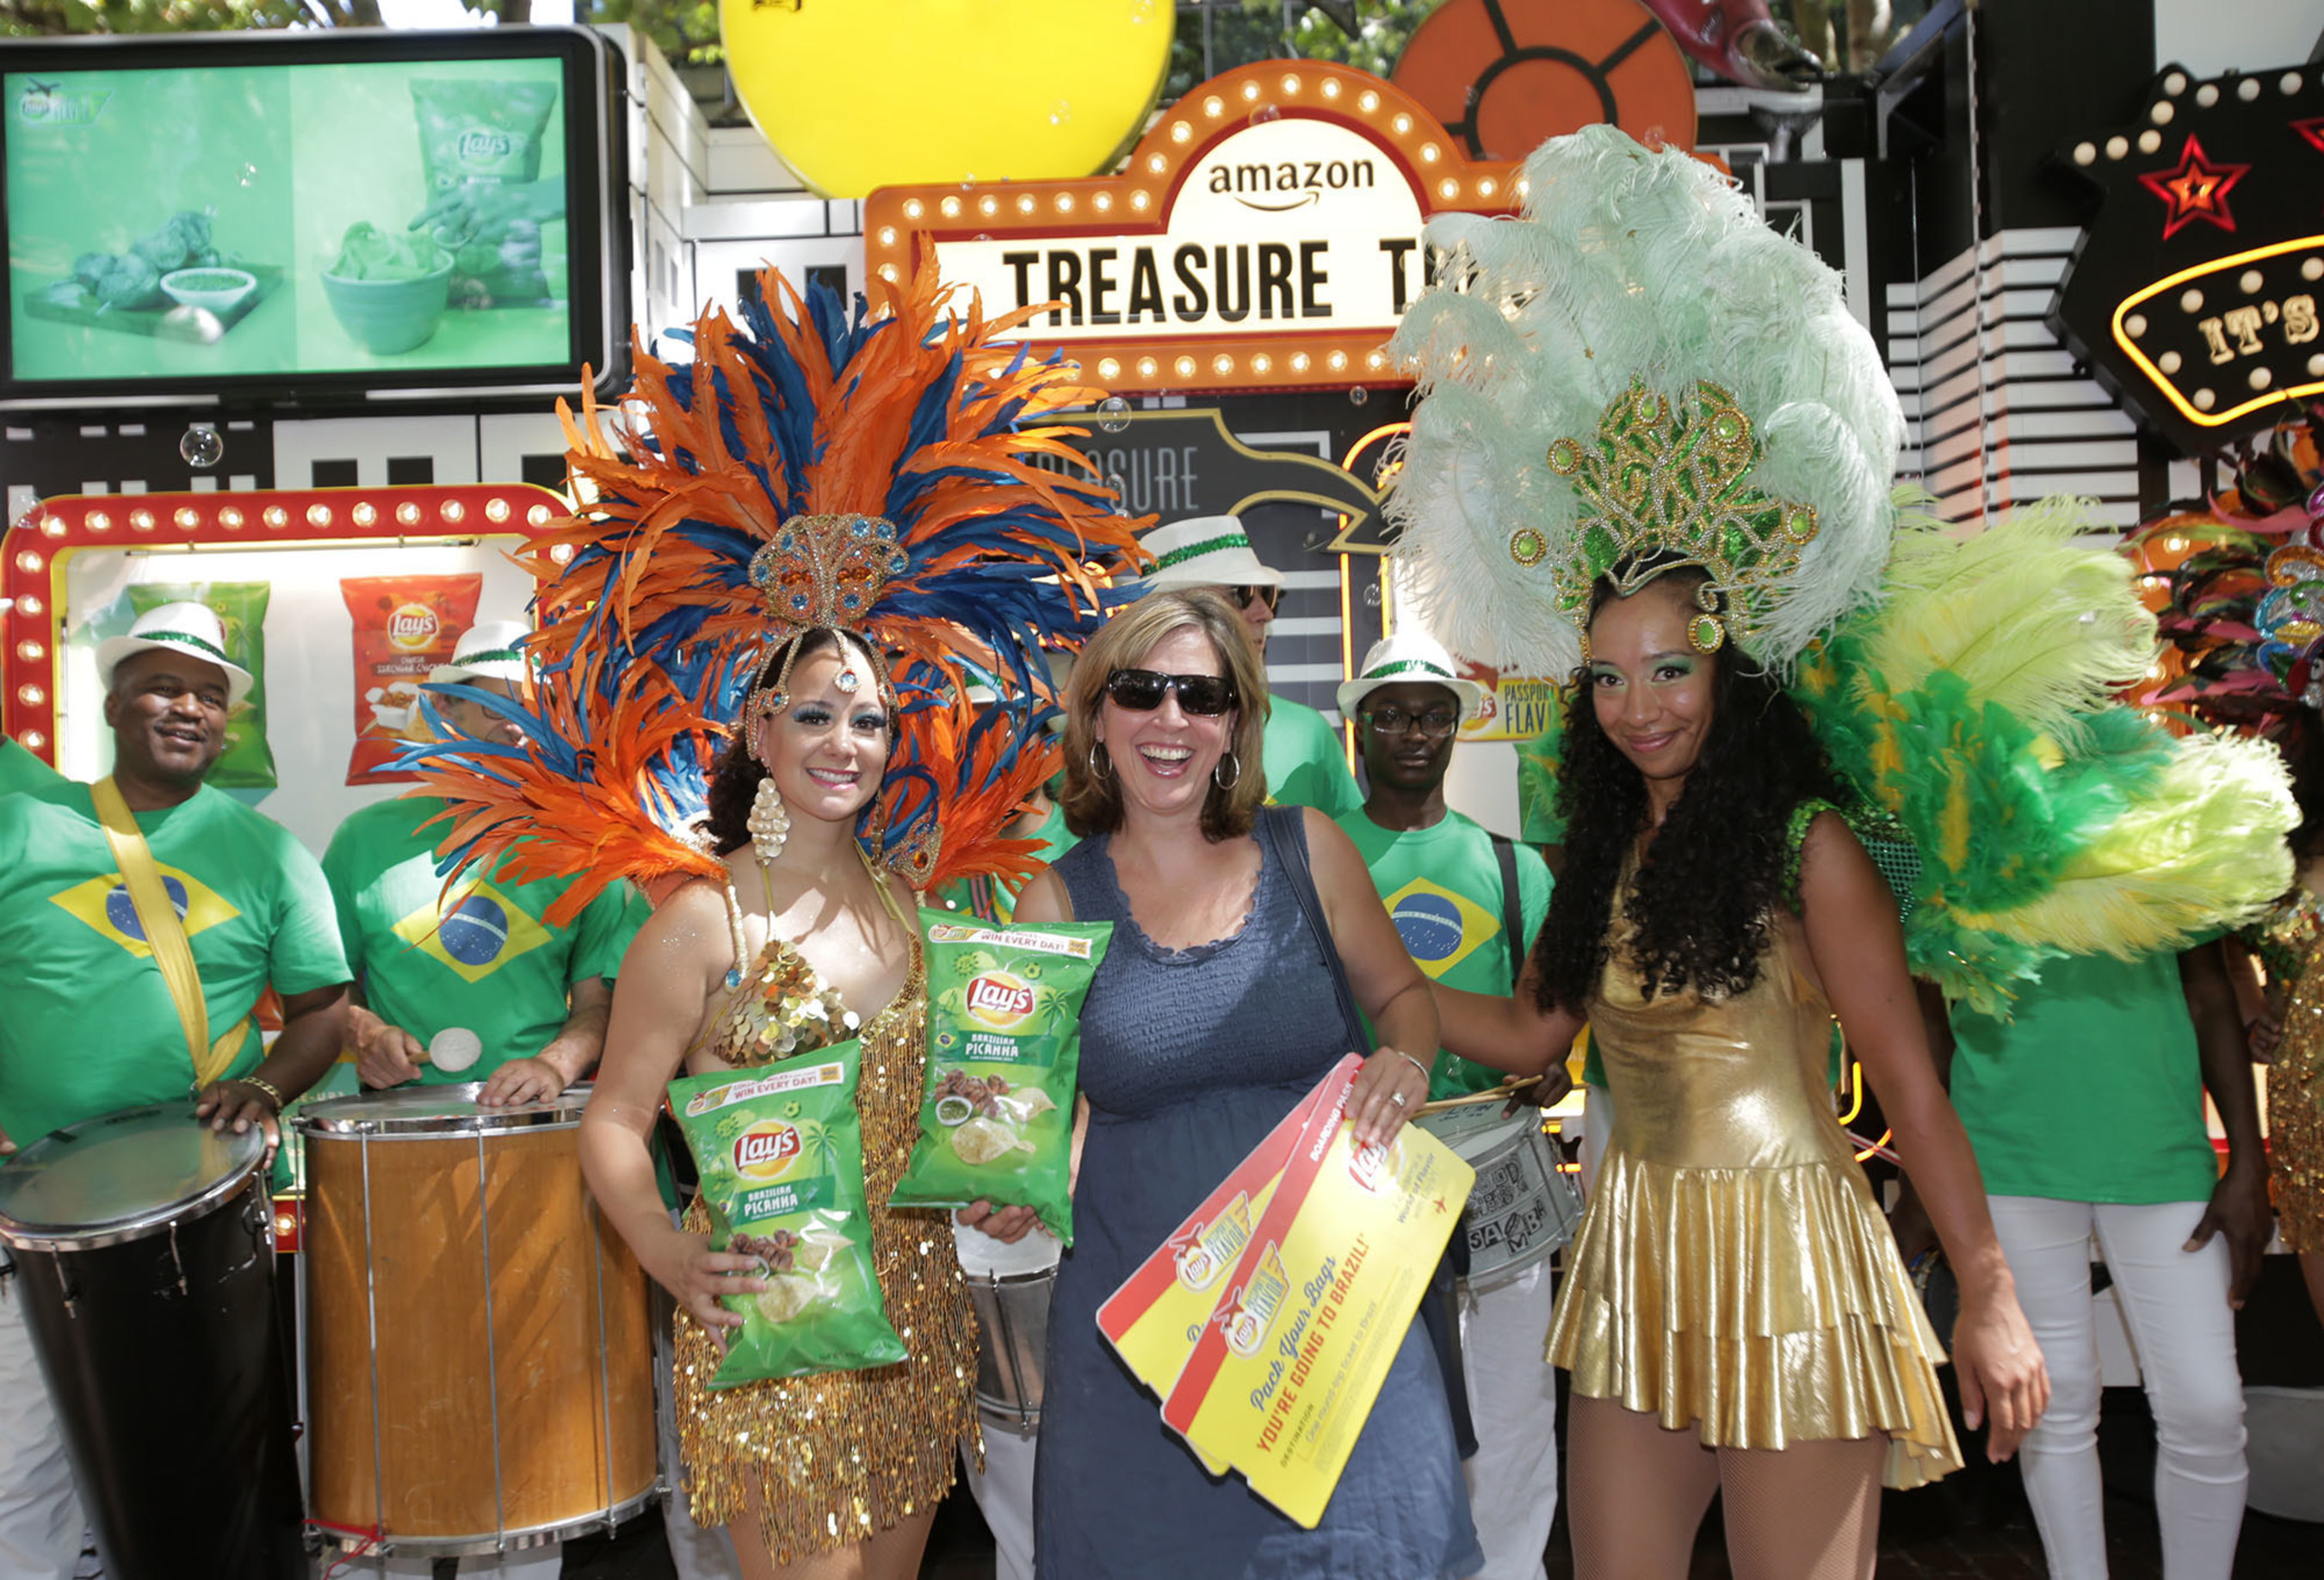 Seattle locals surprised with Brazilian Carnival experience at the Amazon Treasure Truck to celebrate the Lay's "Passport to Flavor" program